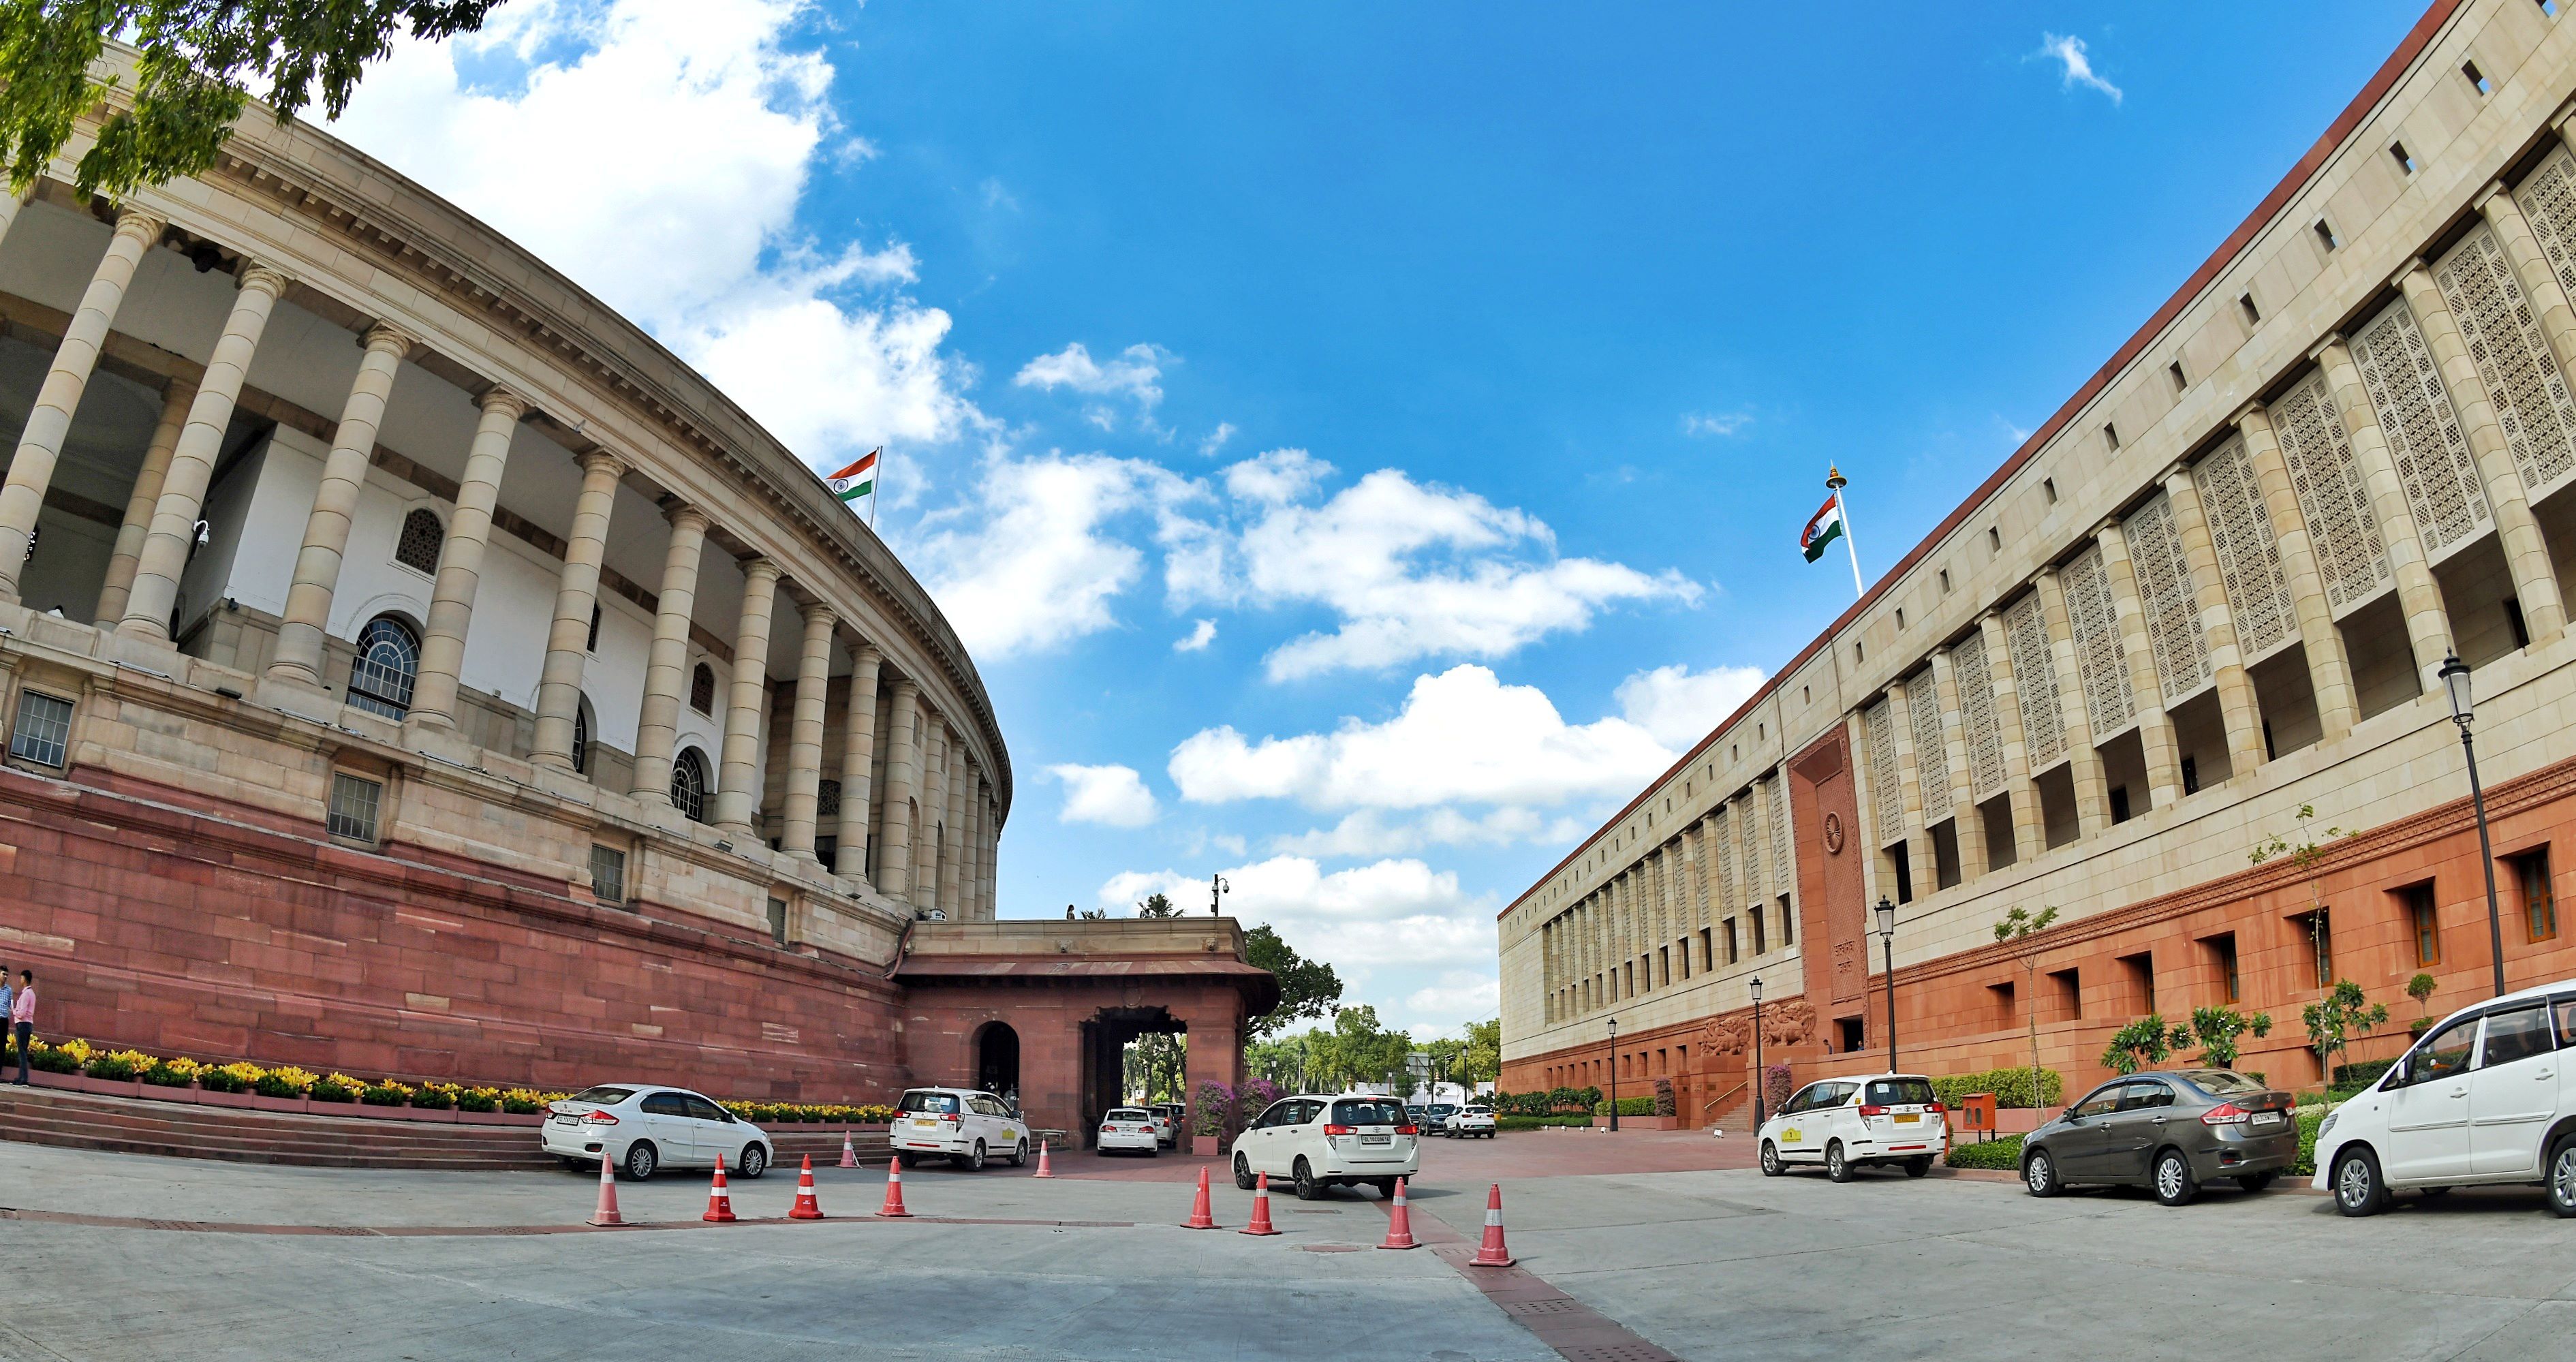 Special Session of Parliament: A HISTORICAL MOVE?